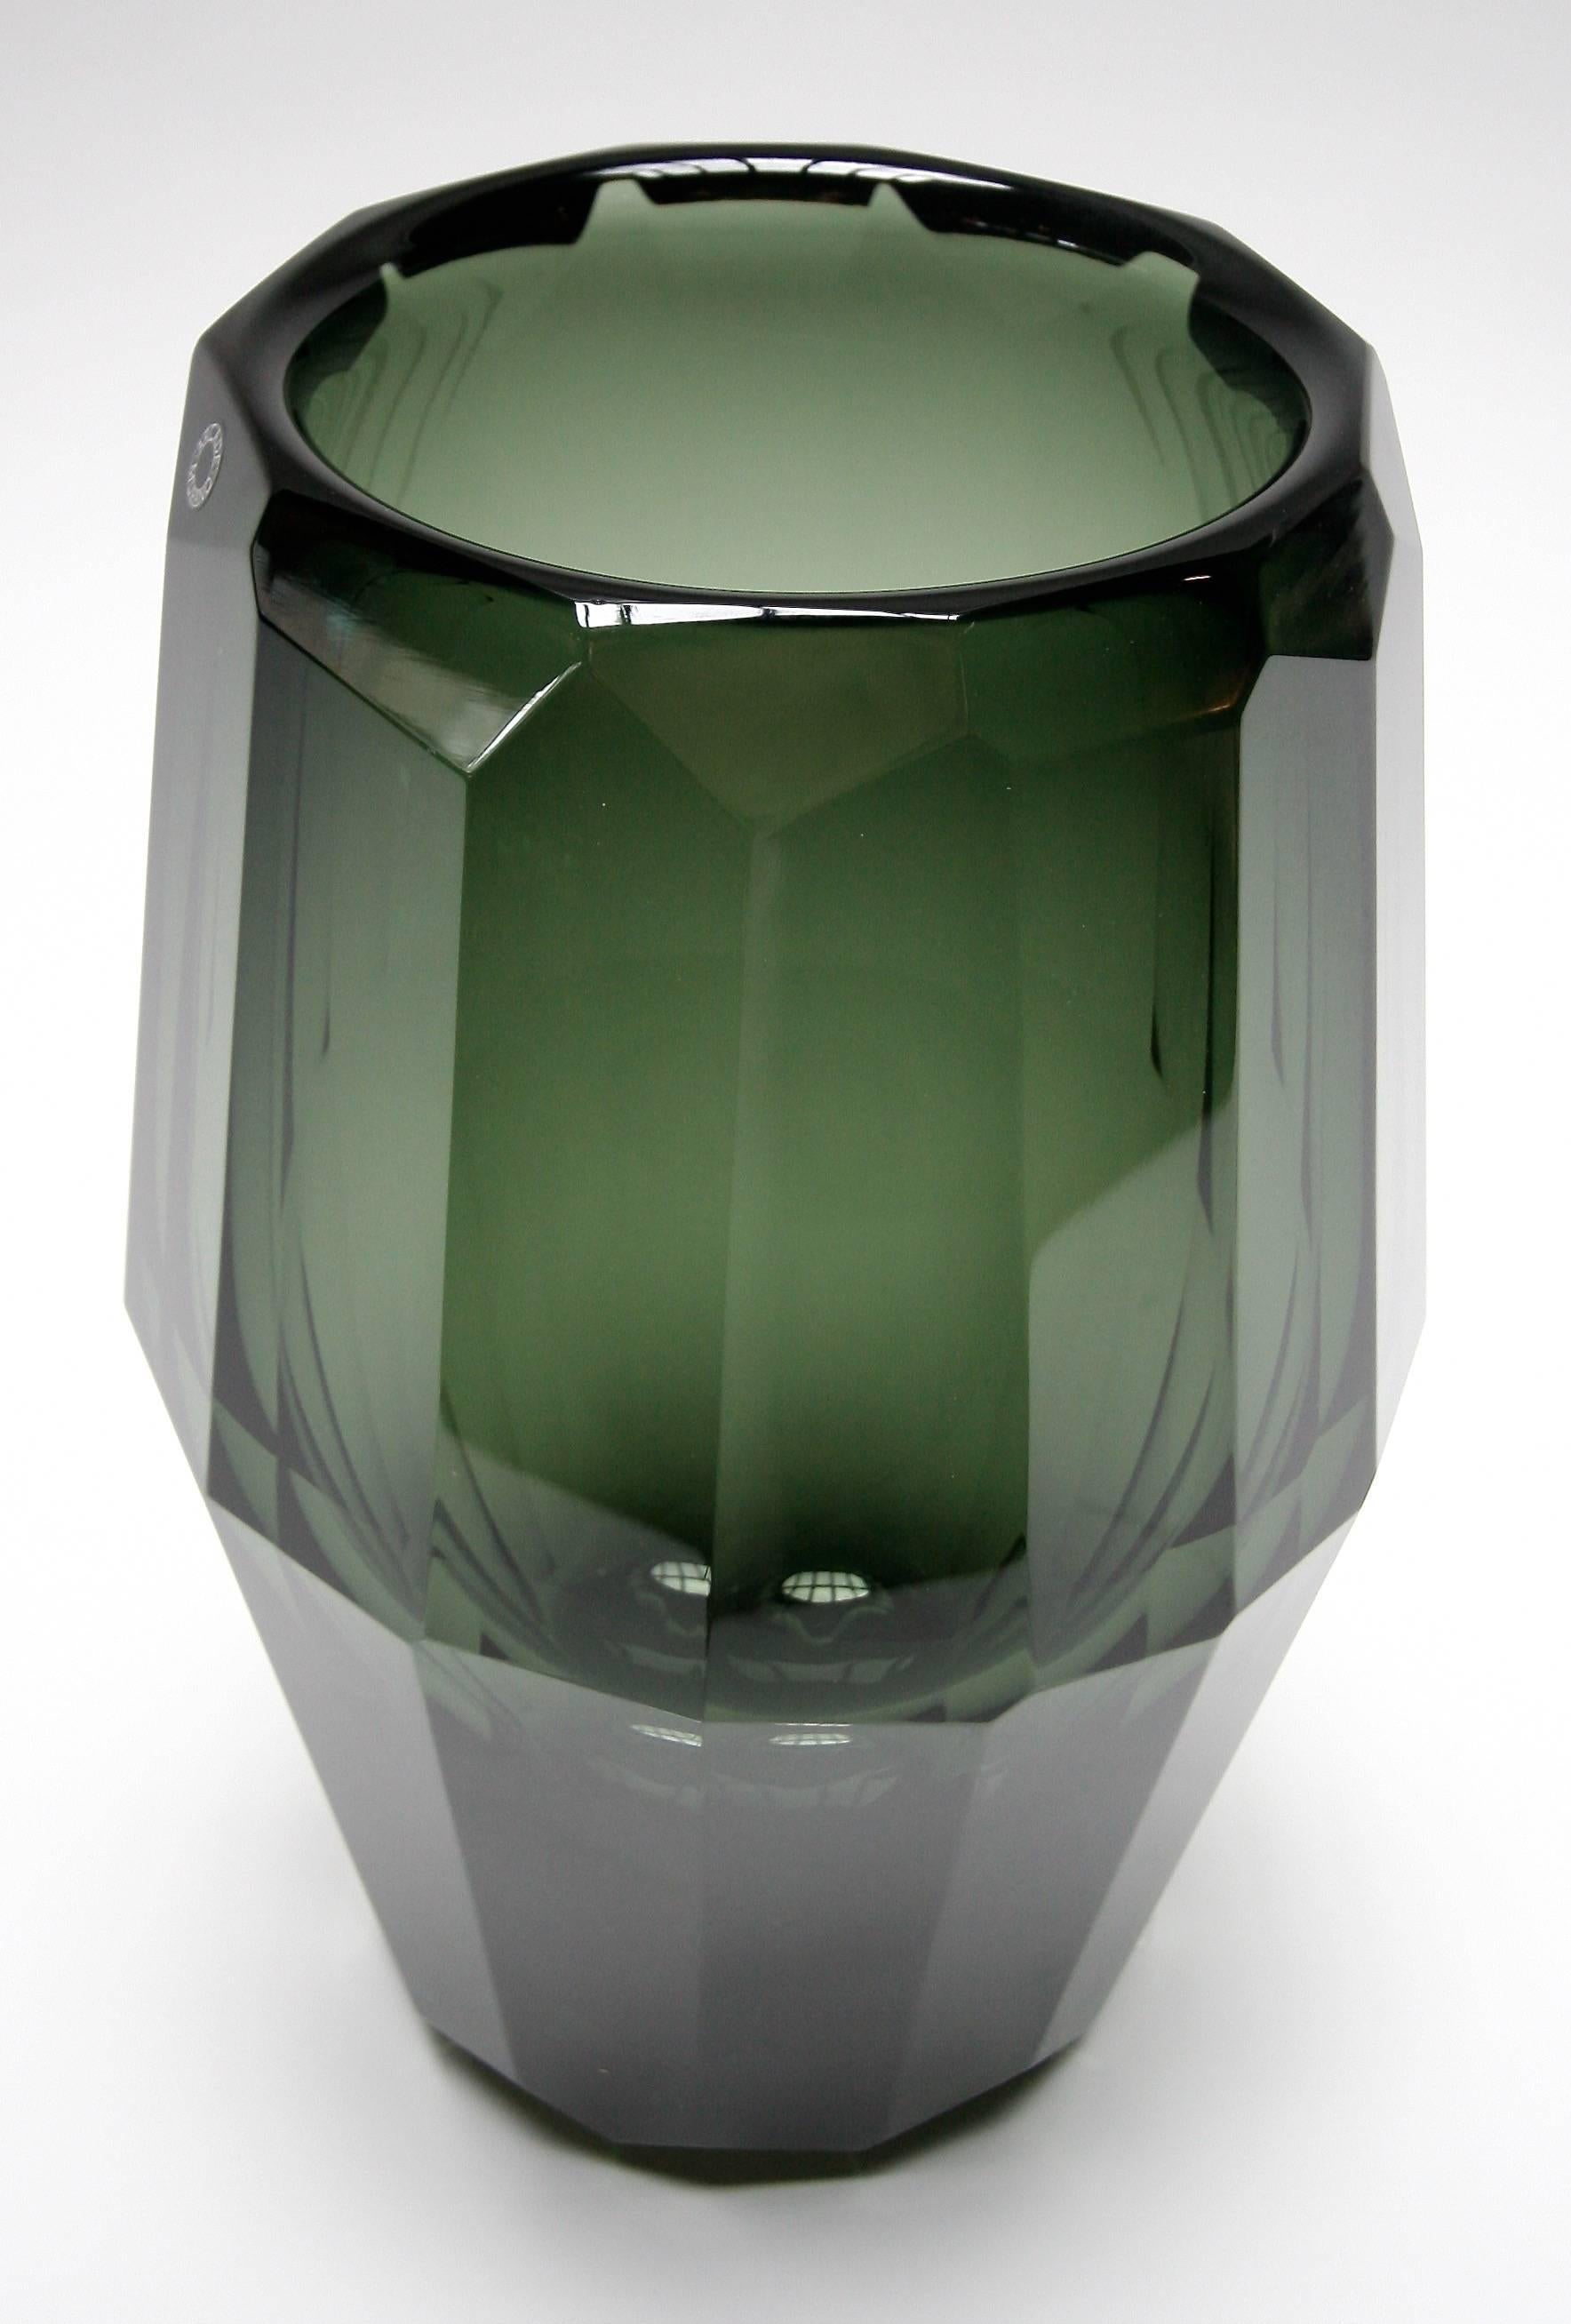 Hermes Murano green glass vase with fluted geometric pattern.